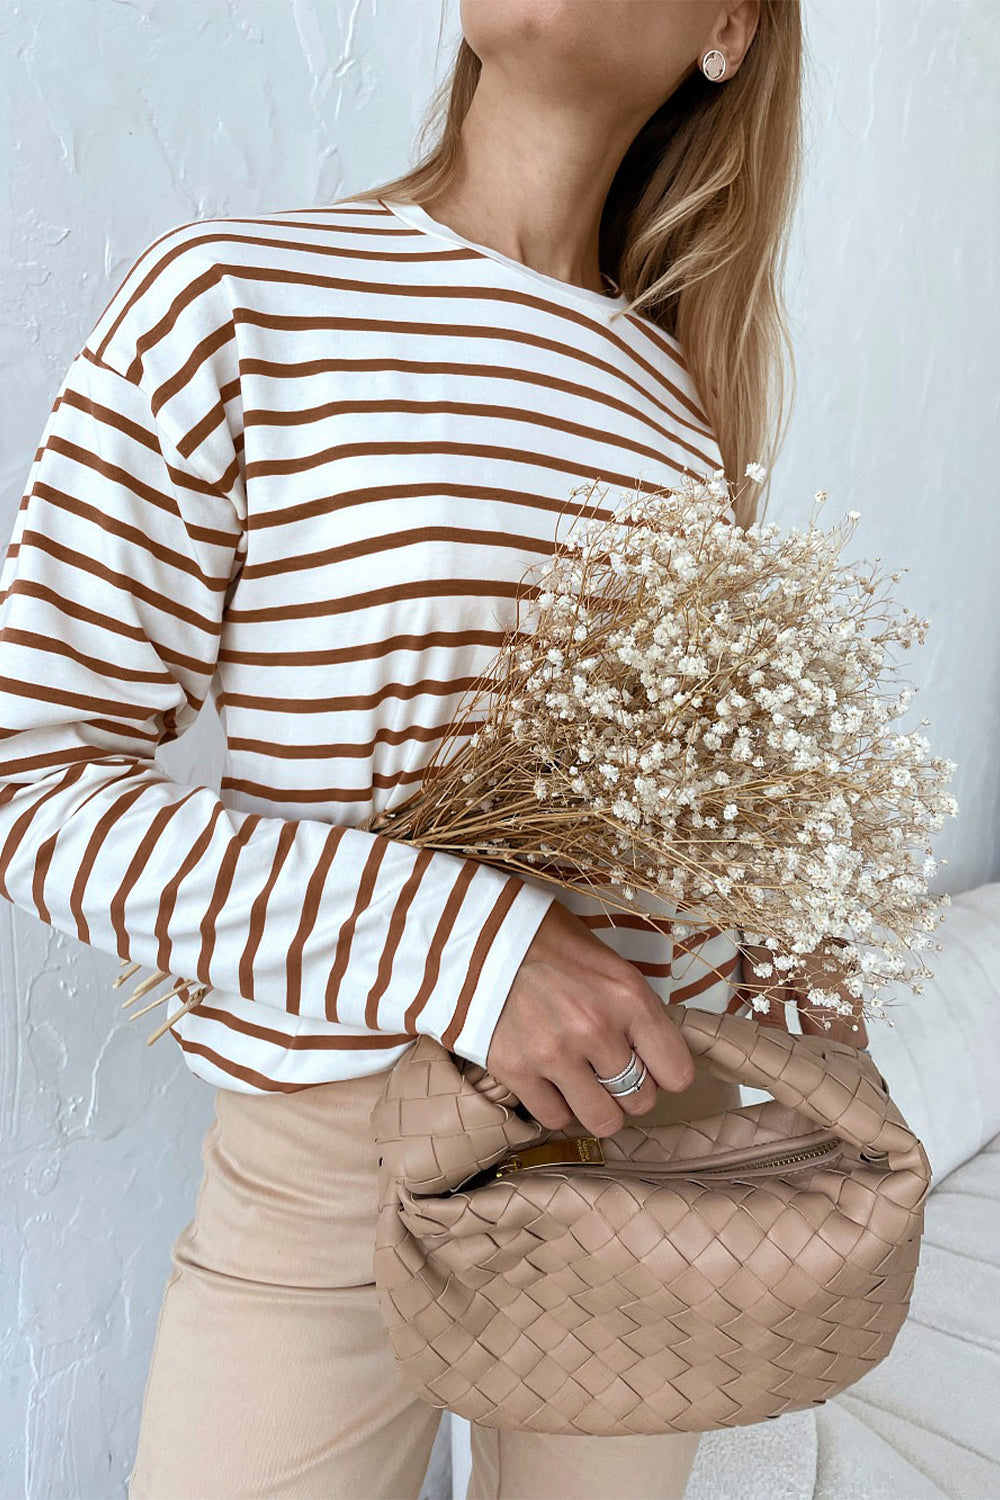 Round Neck Striped Dropped Shoulder T-Shirt